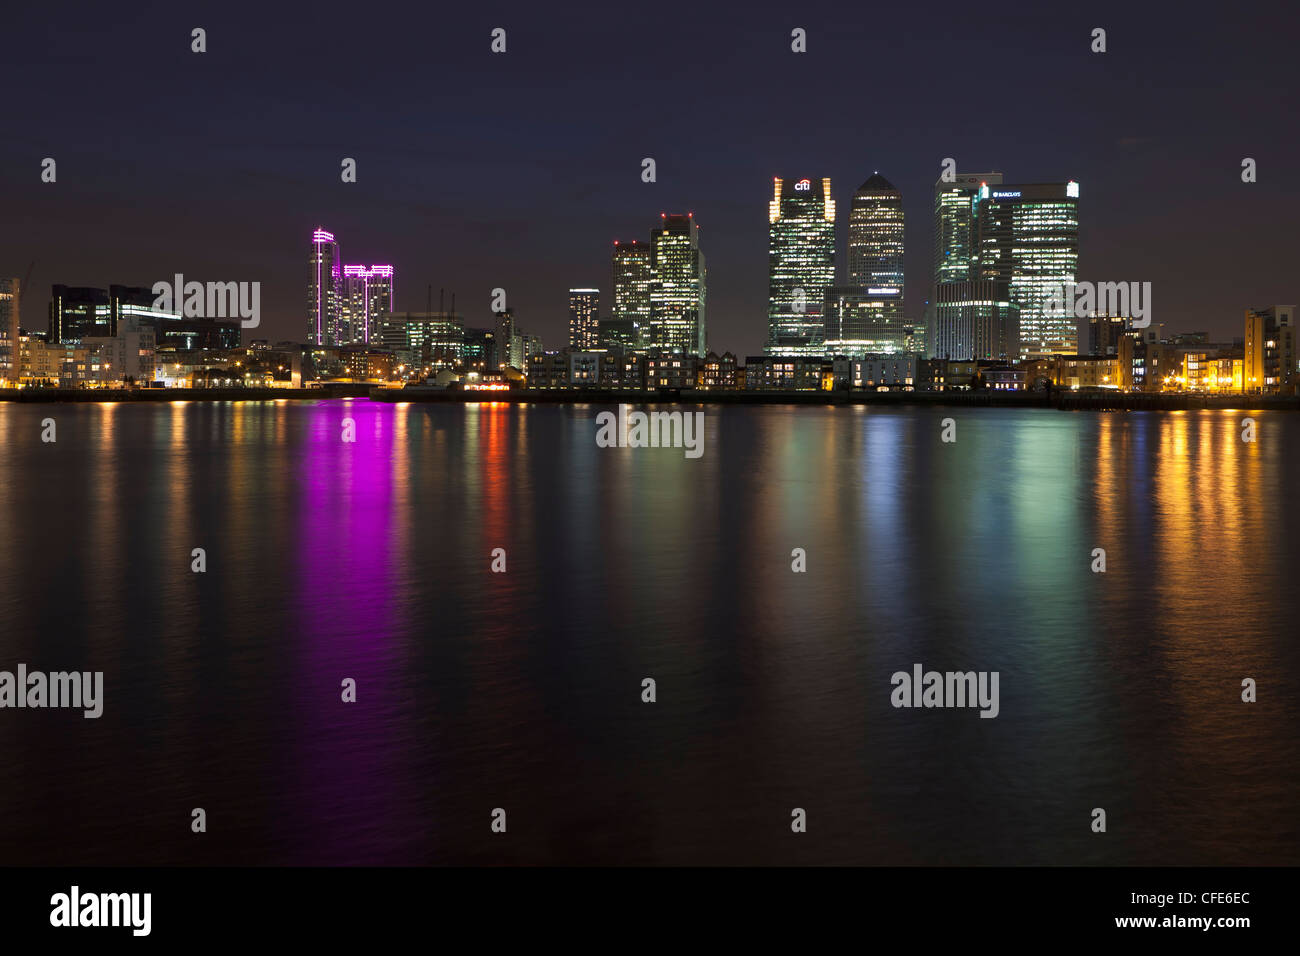 Canary Wharf financial district viewed over the river Thames, London, UK Stock Photo